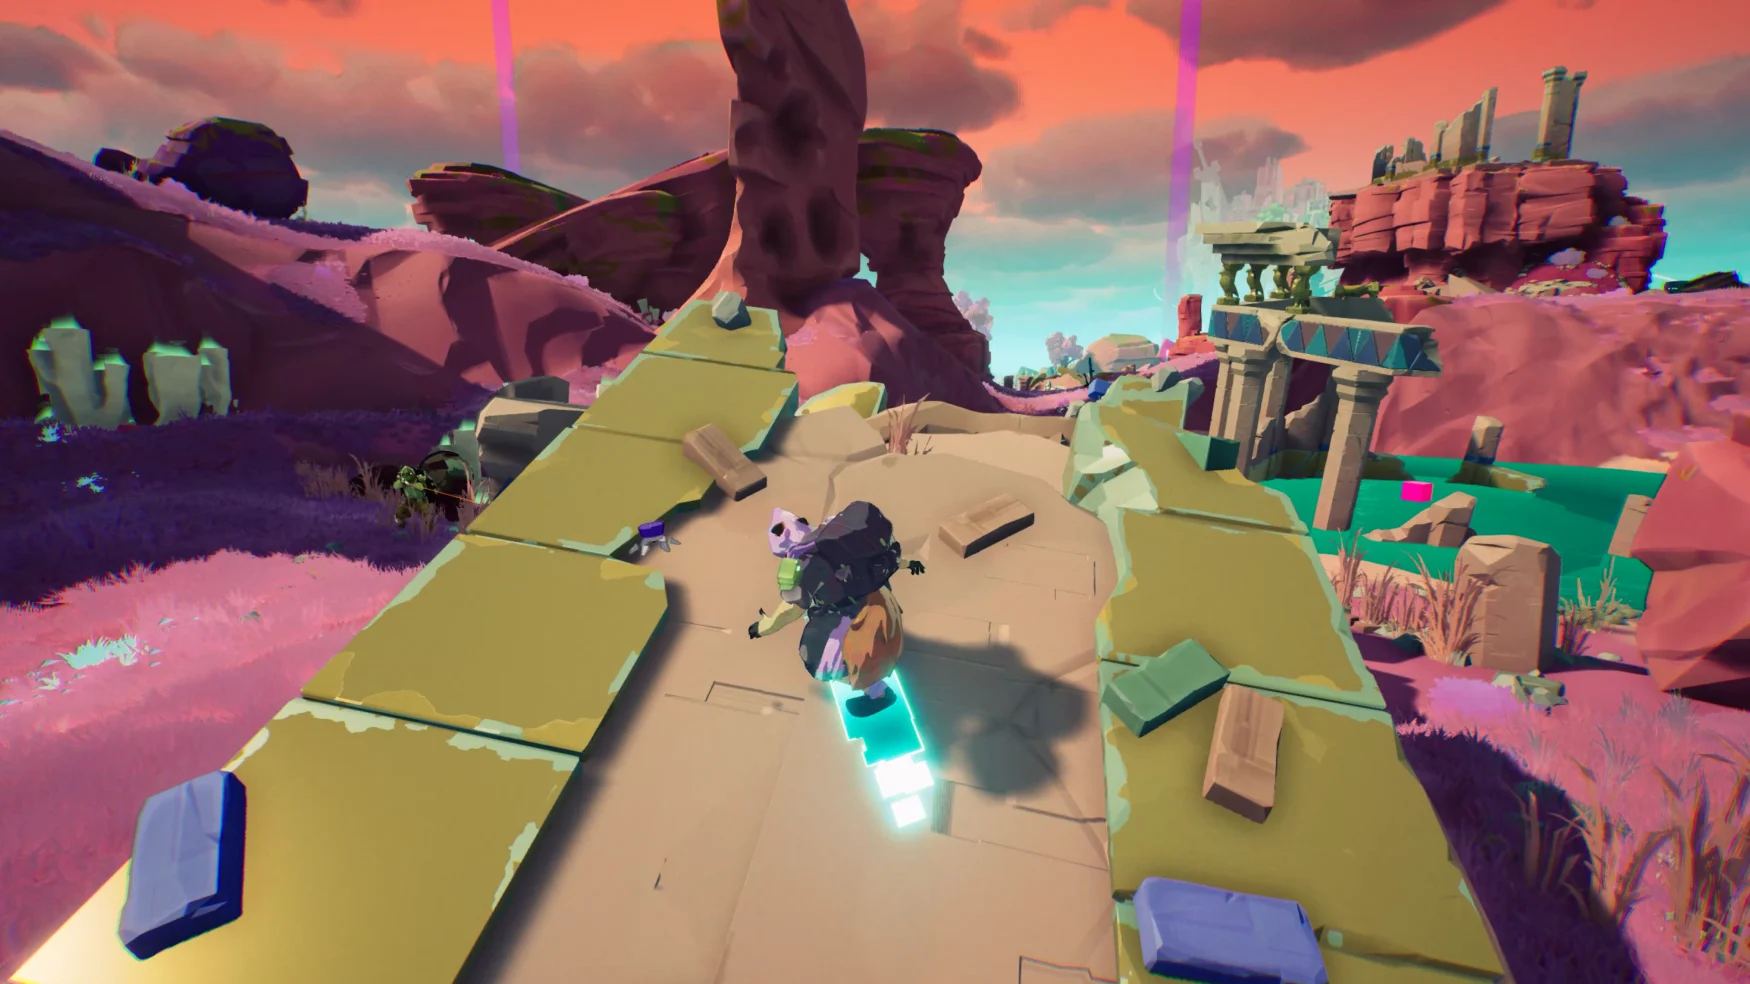 Promotional still from the upcoming game ‘Hyper Light Breaker.’ A character surfs down a ruined section of a building, ready to jump off the end. Desert terrain and ruins are visible in the background.